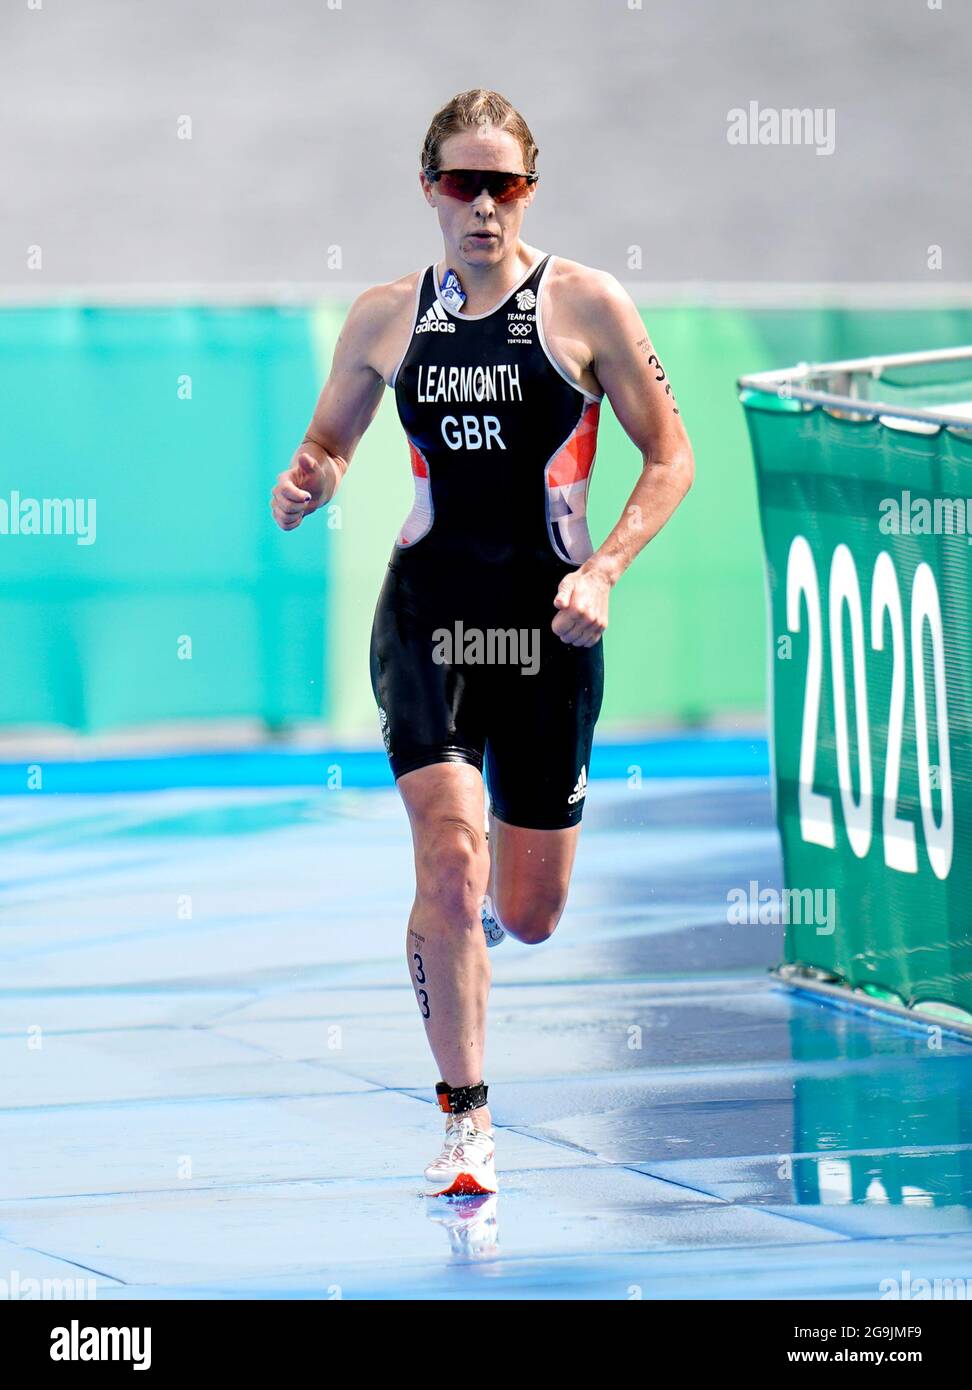 Great Britain's Jessica Learmonth during the Women's Triathlon at the Odaiba Marine Park on the fourth day of the Tokyo 2020 Olympic Games in Japan. Picture date: Tuesday July 27, 2021. Stock Photo